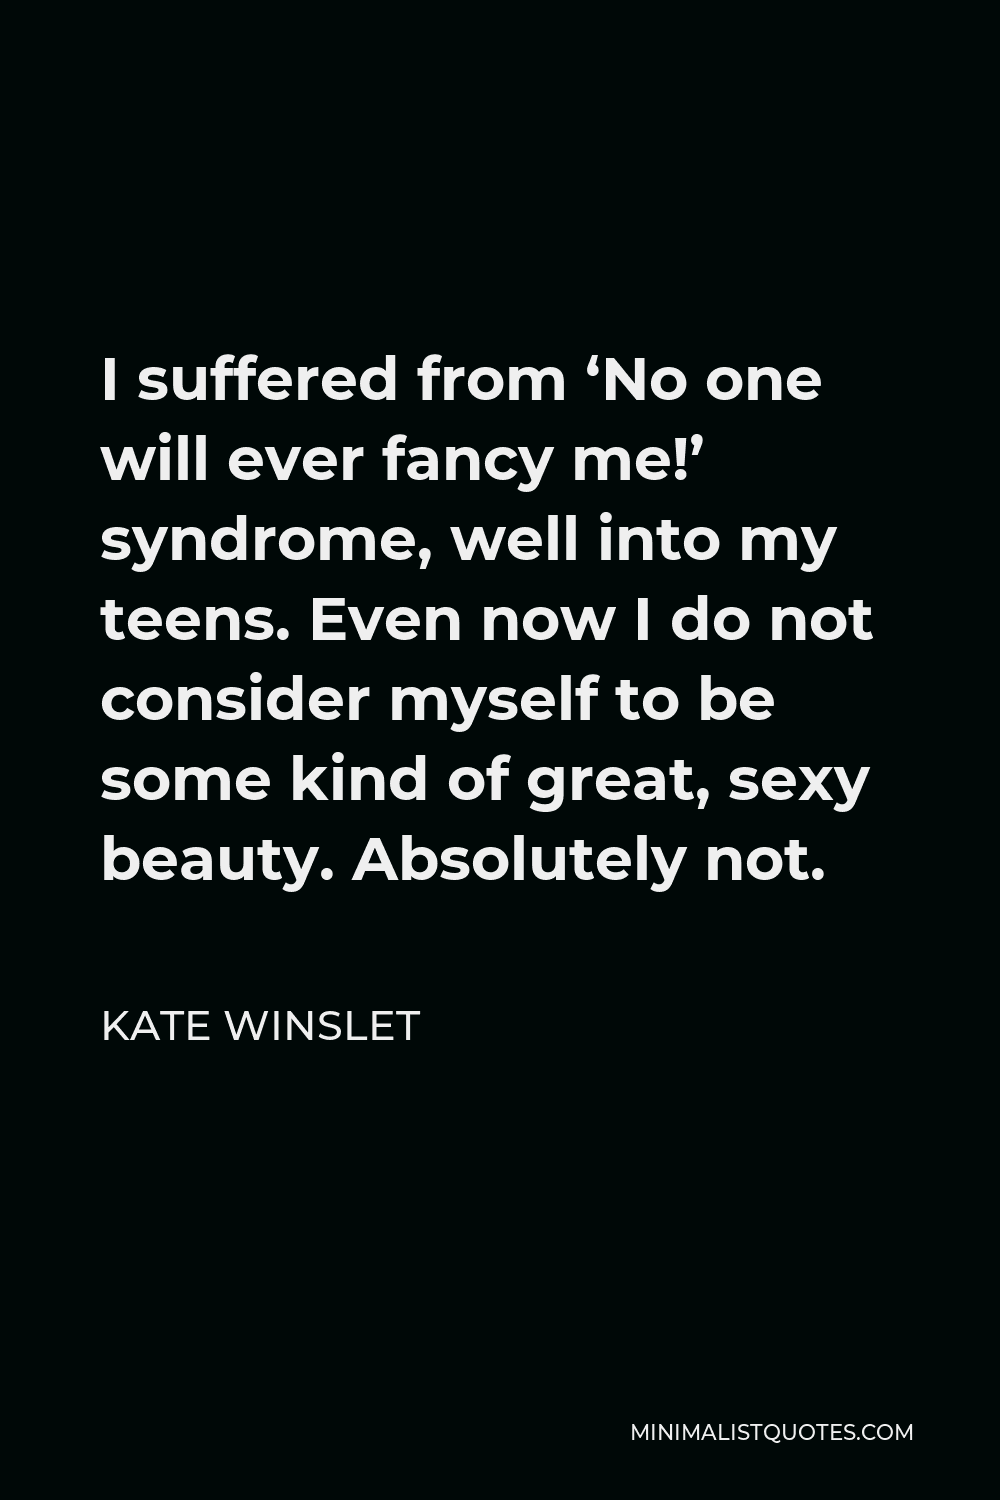 Kate Winslet Quote - I suffered from ‘No one will ever fancy me!’ syndrome, well into my teens. Even now I do not consider myself to be some kind of great, sexy beauty. Absolutely not.